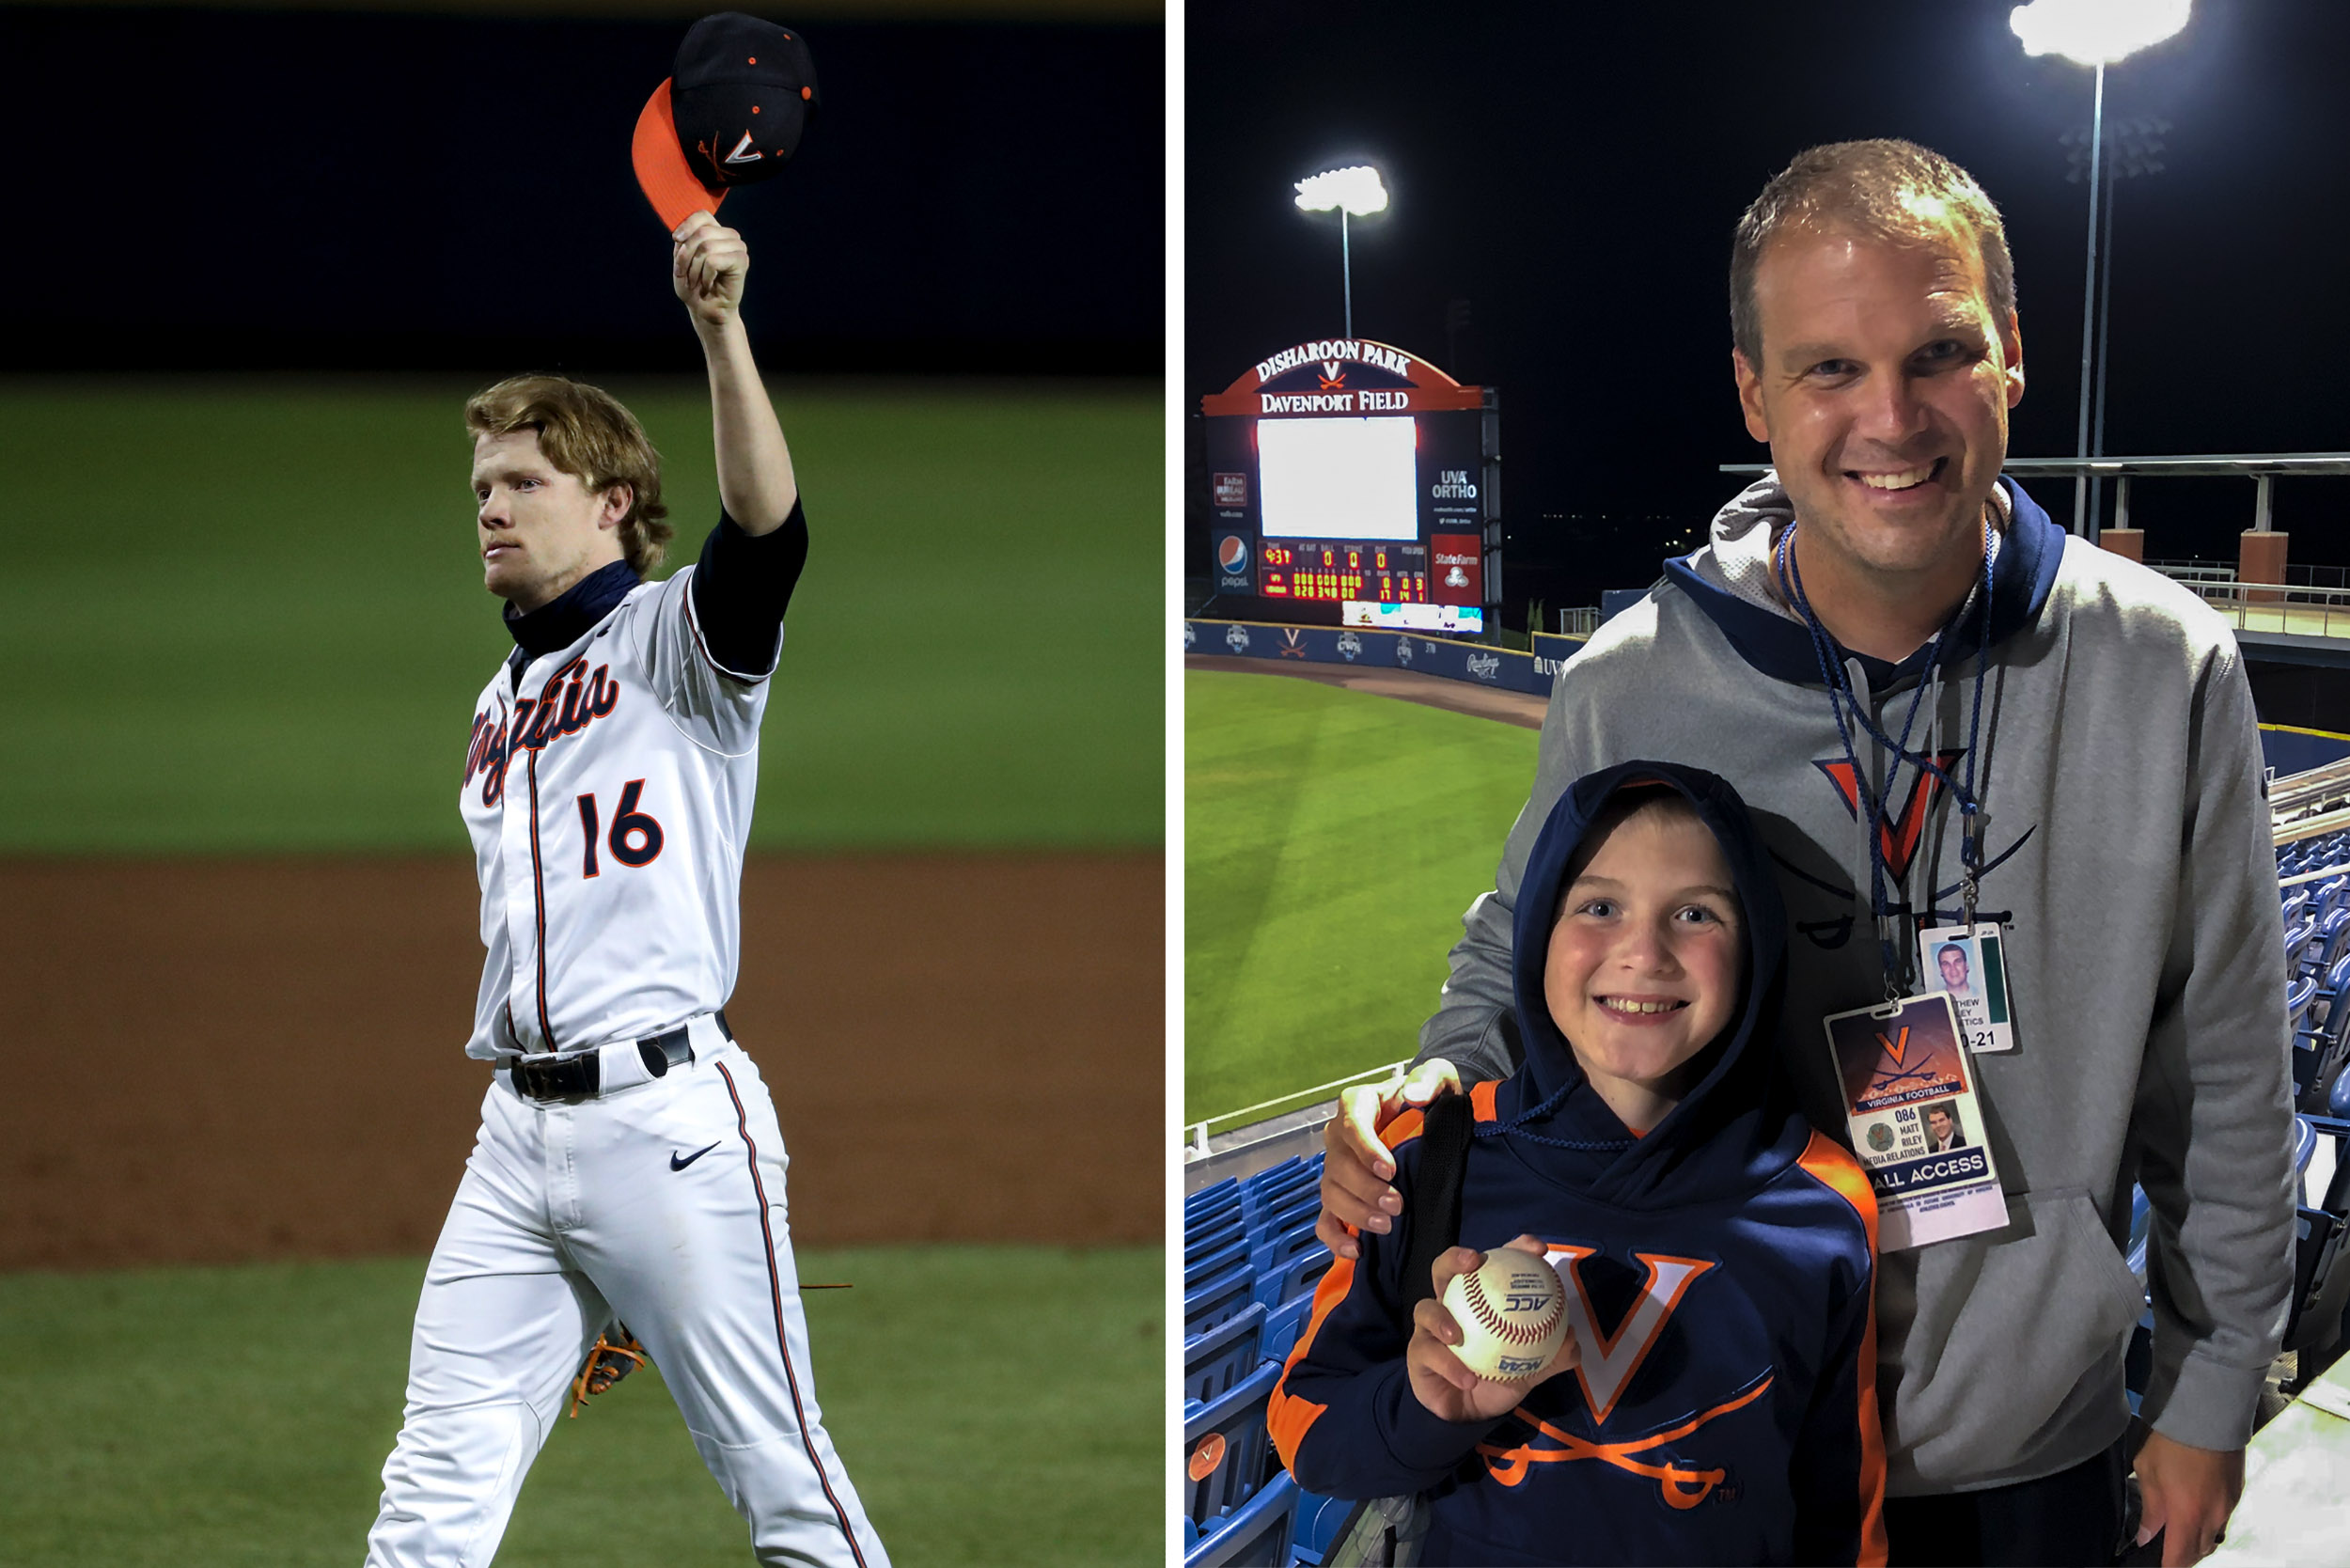 Left: UVA mens baseball player walking across field with hat raised in the air.  Right: Man with a child who is holding a baseball from the game